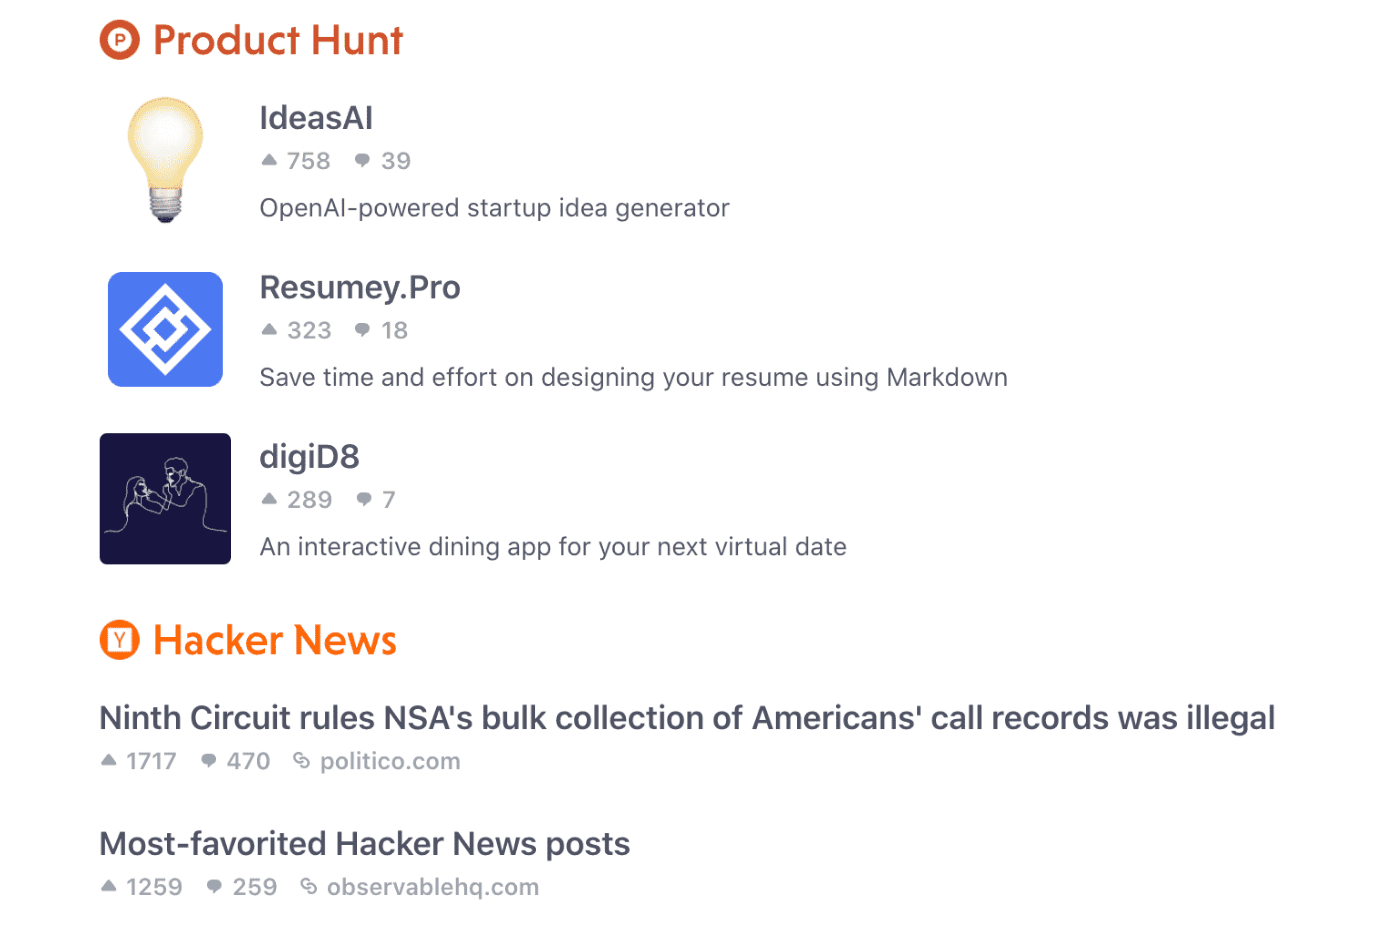 Get Daily Email Digest From Your Favorite Newsletters and Creators